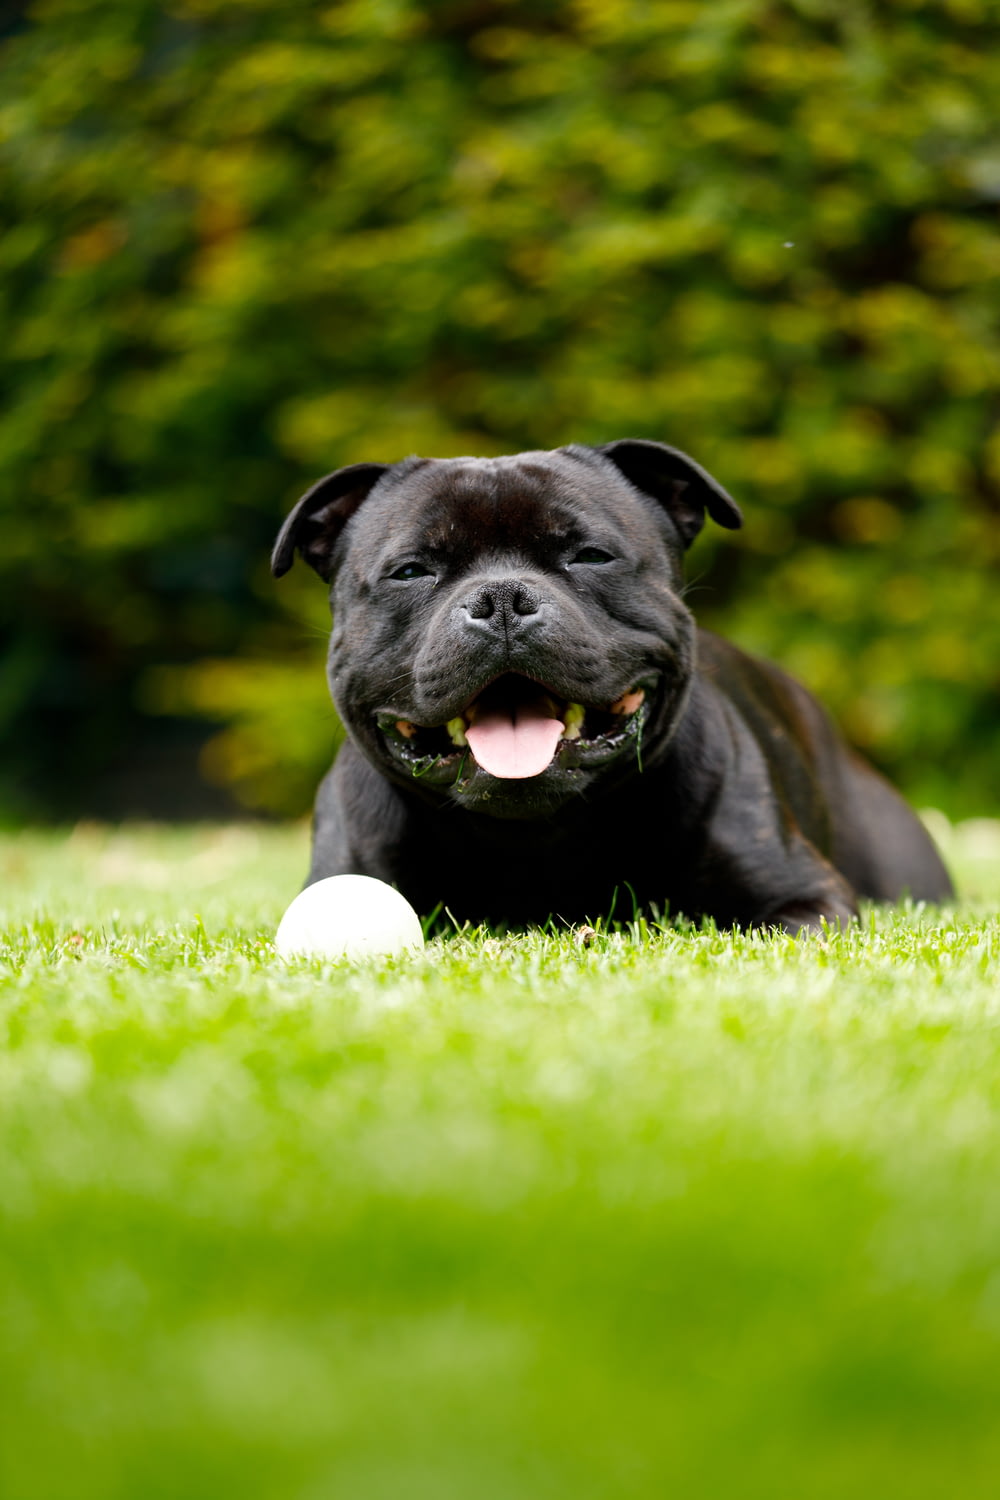 black short coated dog on green grass field during daytime